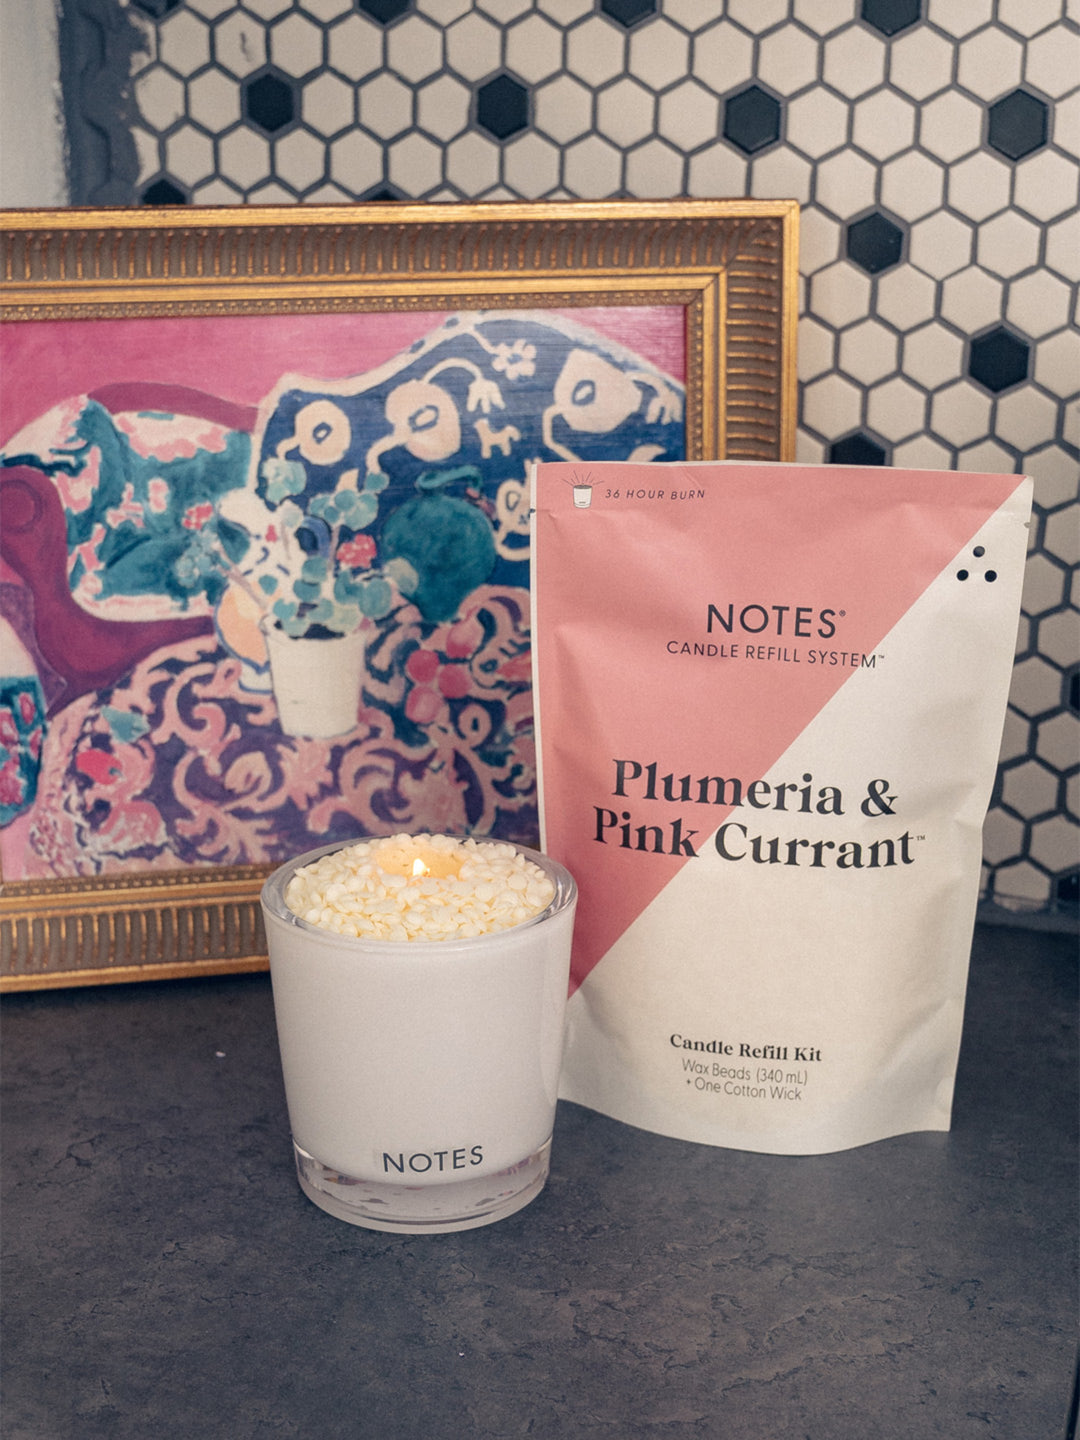 Sustainable Candle Refill Kit - NOTES Plumeria & Pink Currant